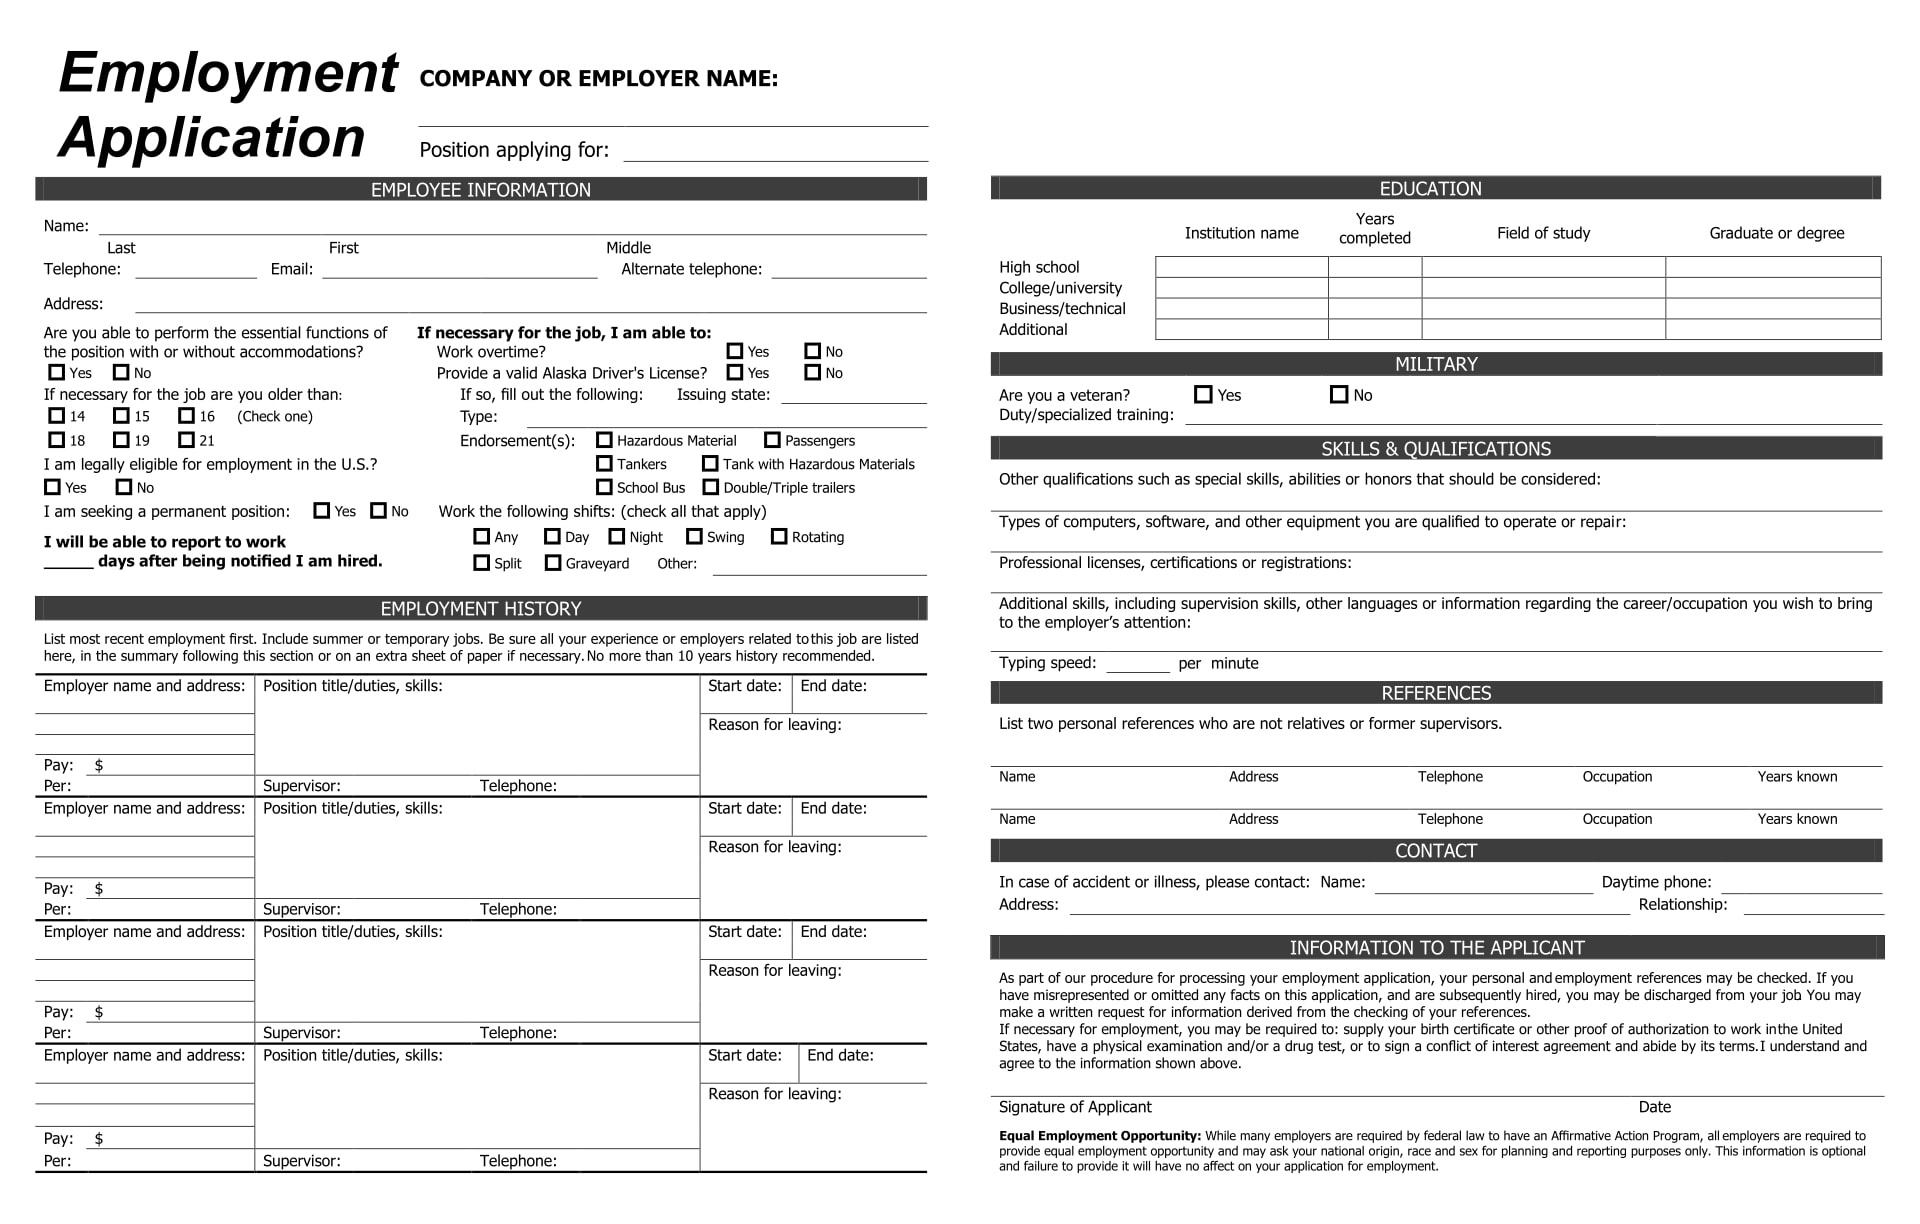 Printable Blank Application For Employment_82224